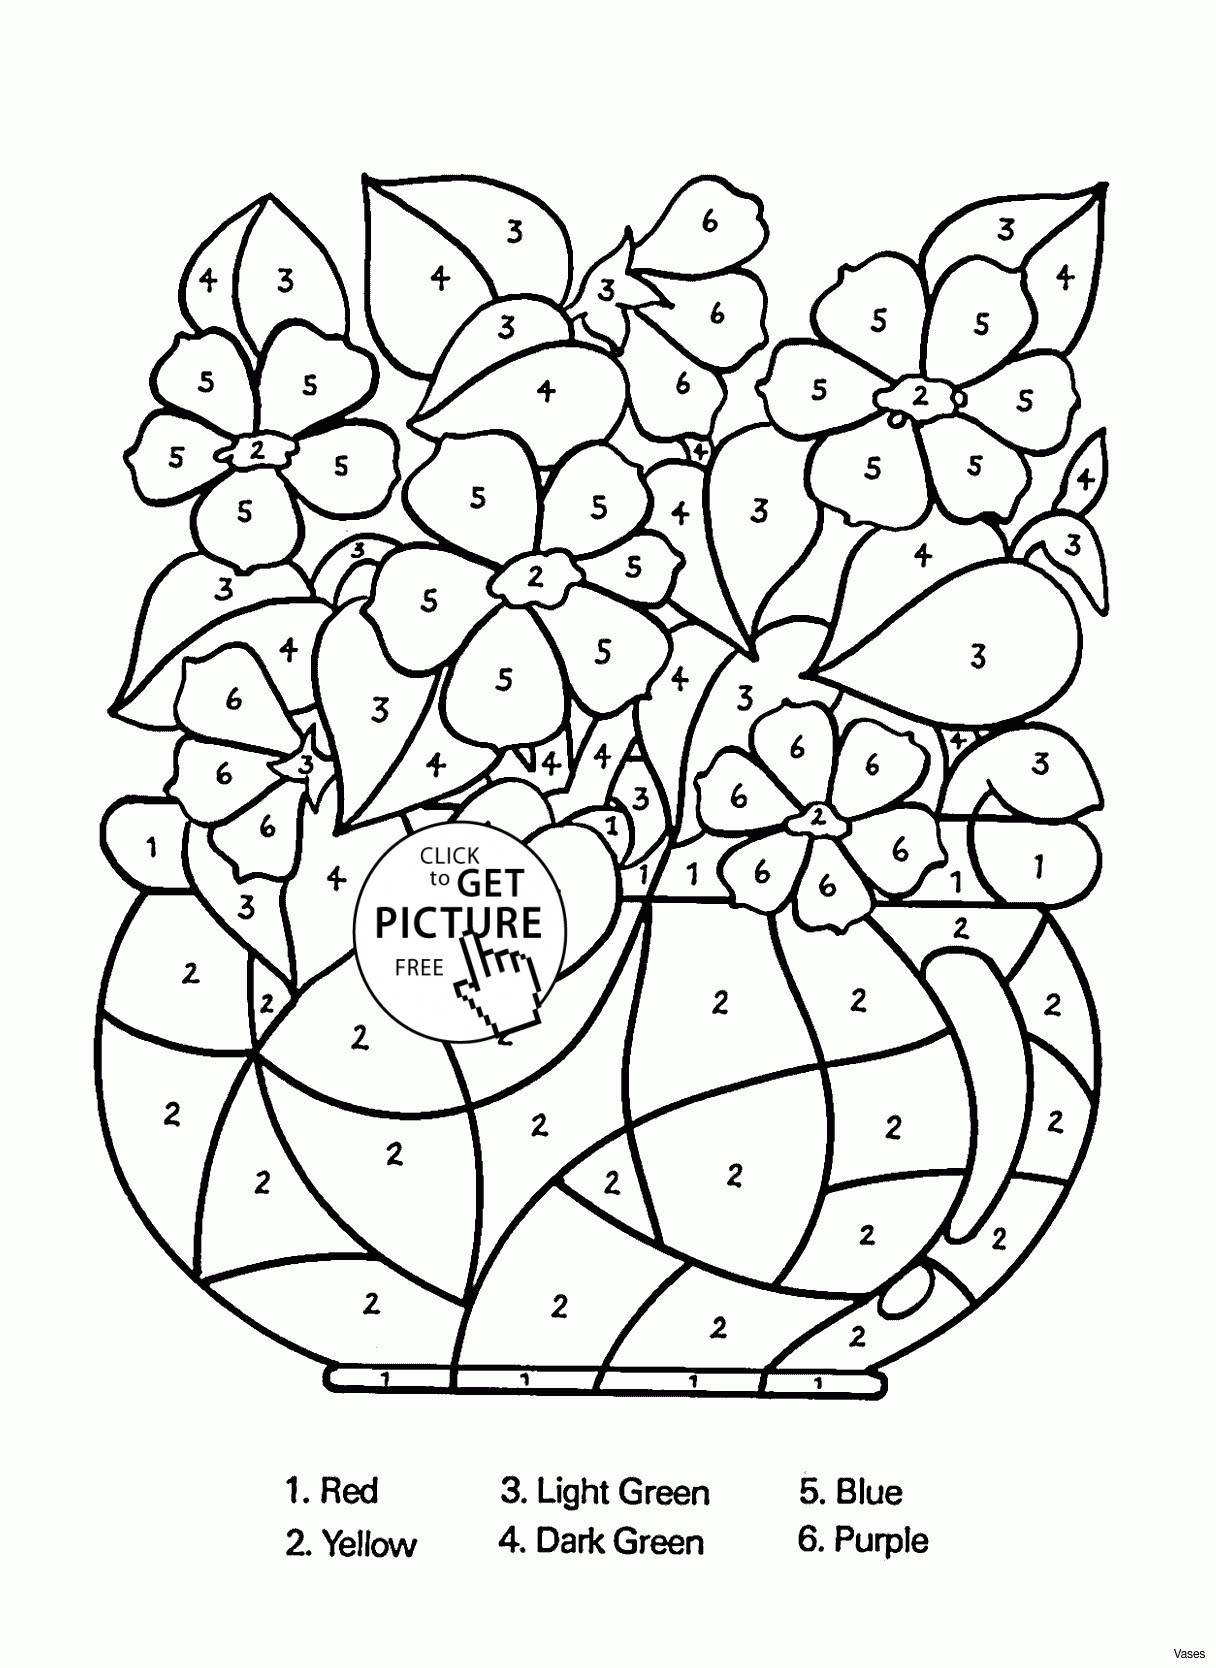 19 Recommended Cheap Metal Vases 2024 free download cheap metal vases of dark green pillows new cool vases flower vase coloring page pages within dark green pillows new cool vases flower vase coloring page pages flowers in a top i